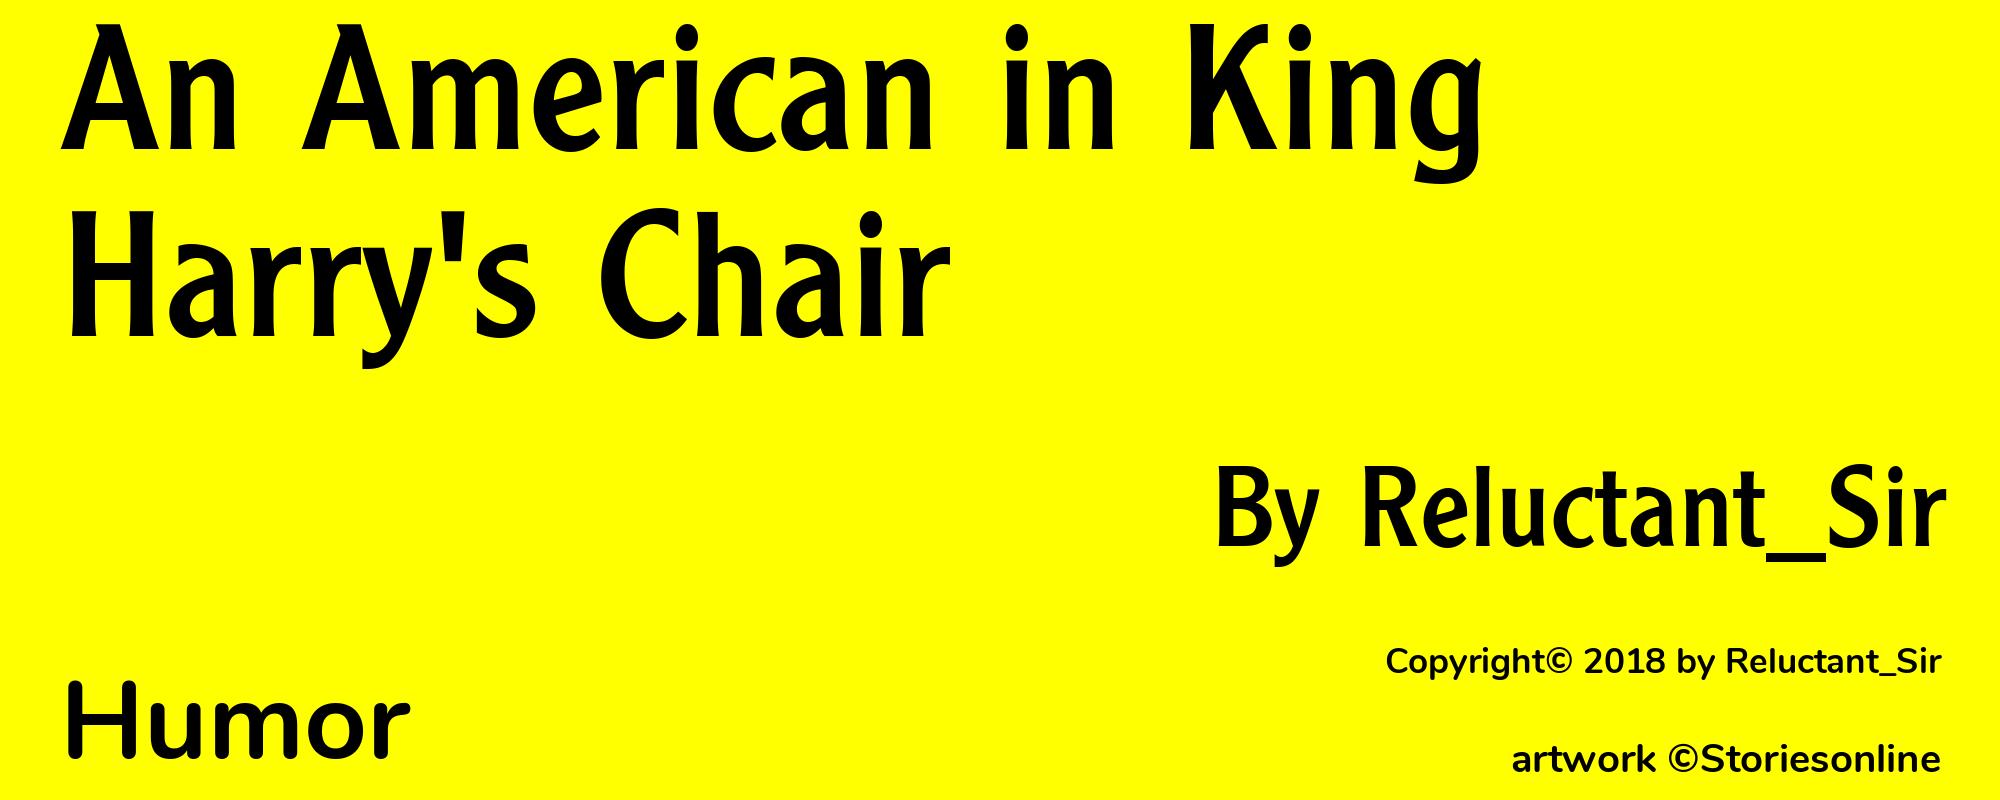 An American in King Harry's Chair - Cover